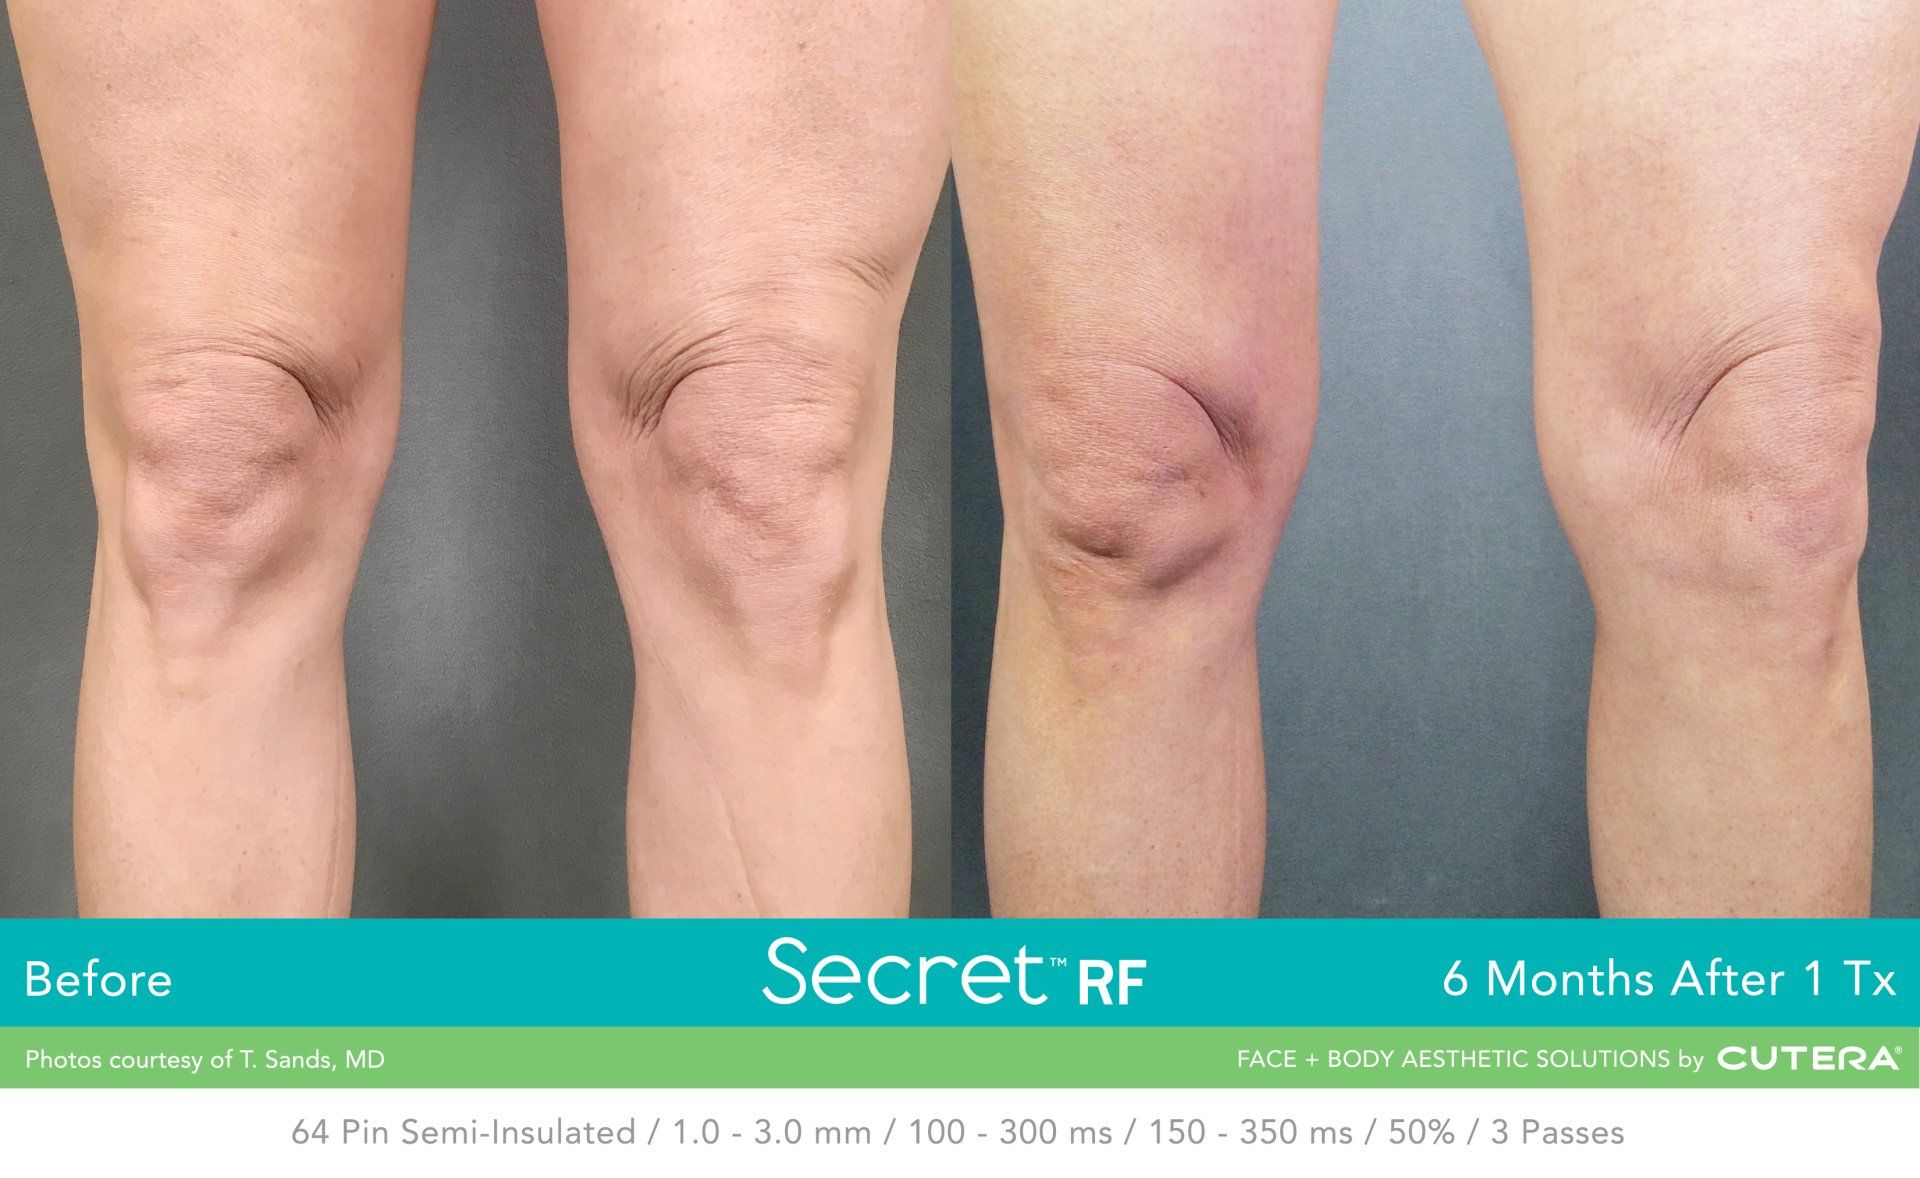 A before and after photo of a person 's knee with secret rf written on the bottom